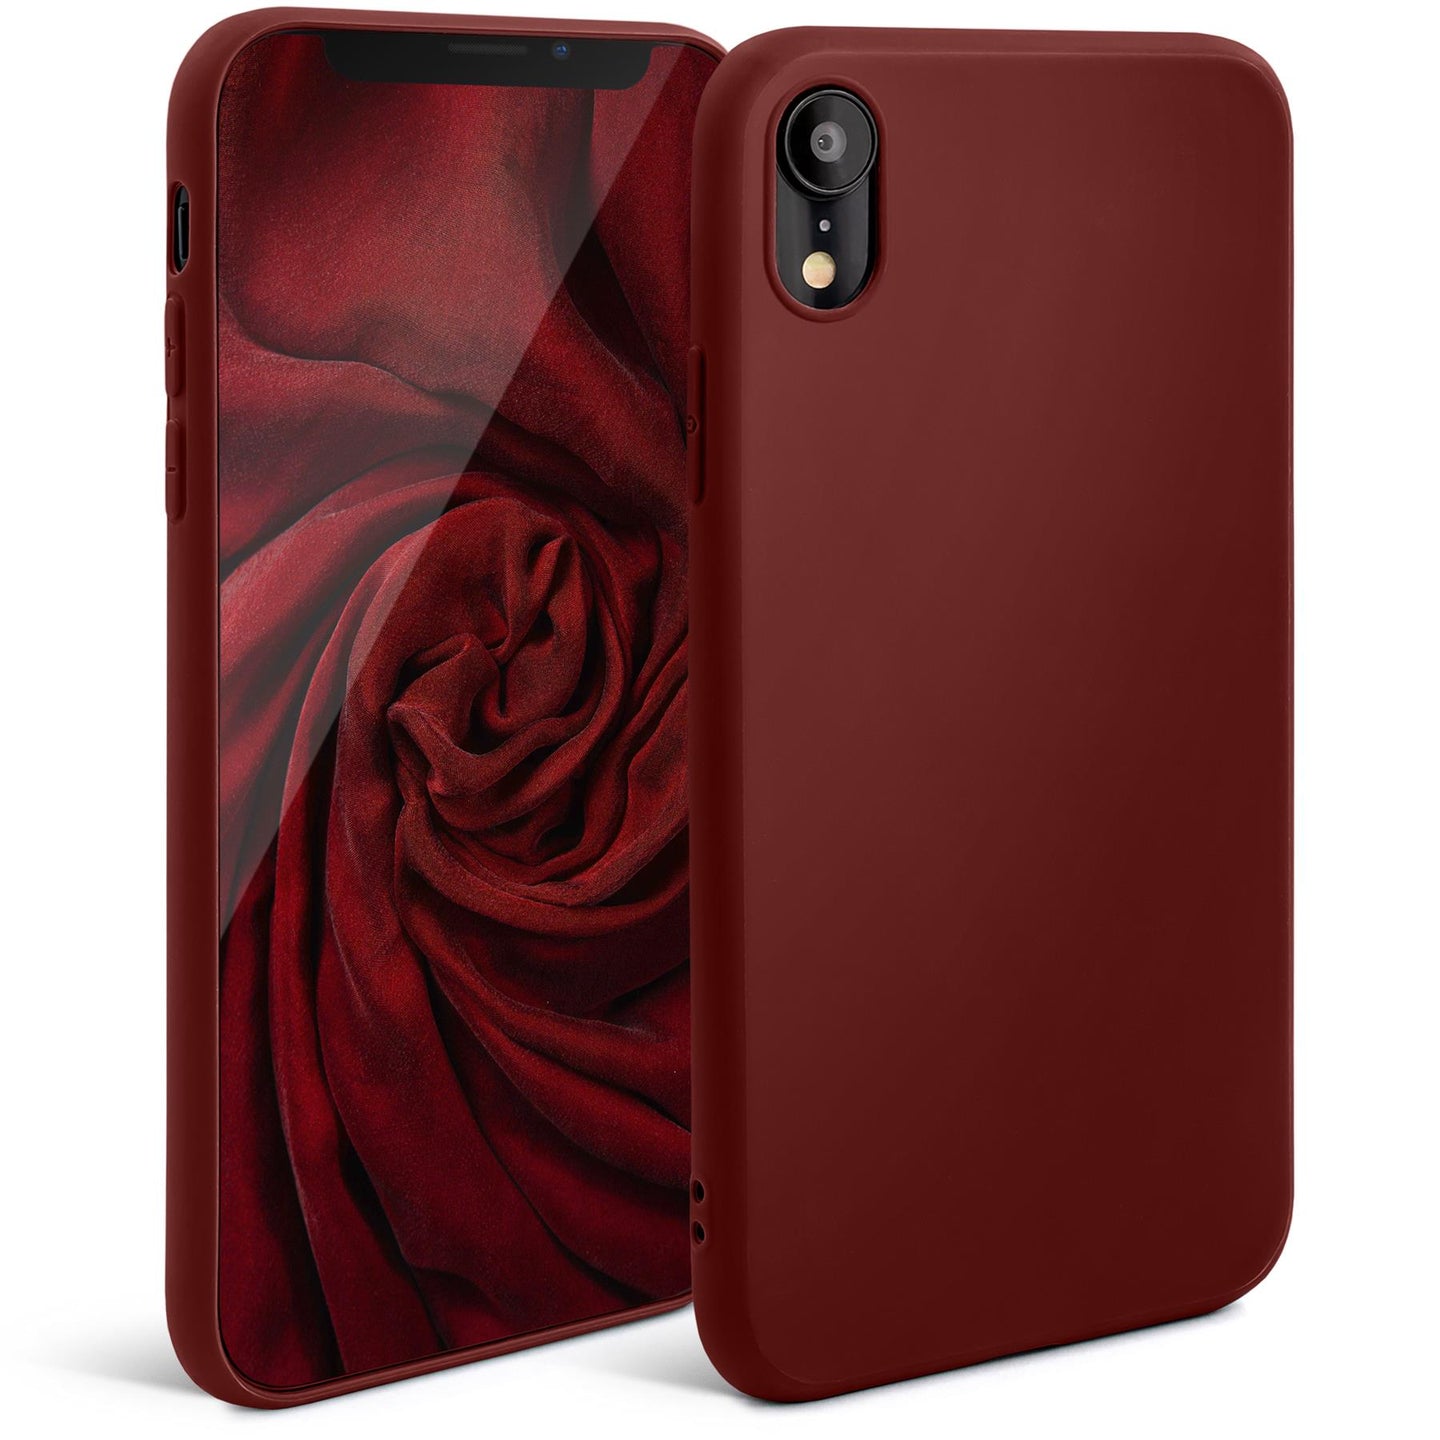 Moozy Minimalist Series Silicone Case for iPhone XR, Wine Red - Matte Finish Slim Soft TPU Cover